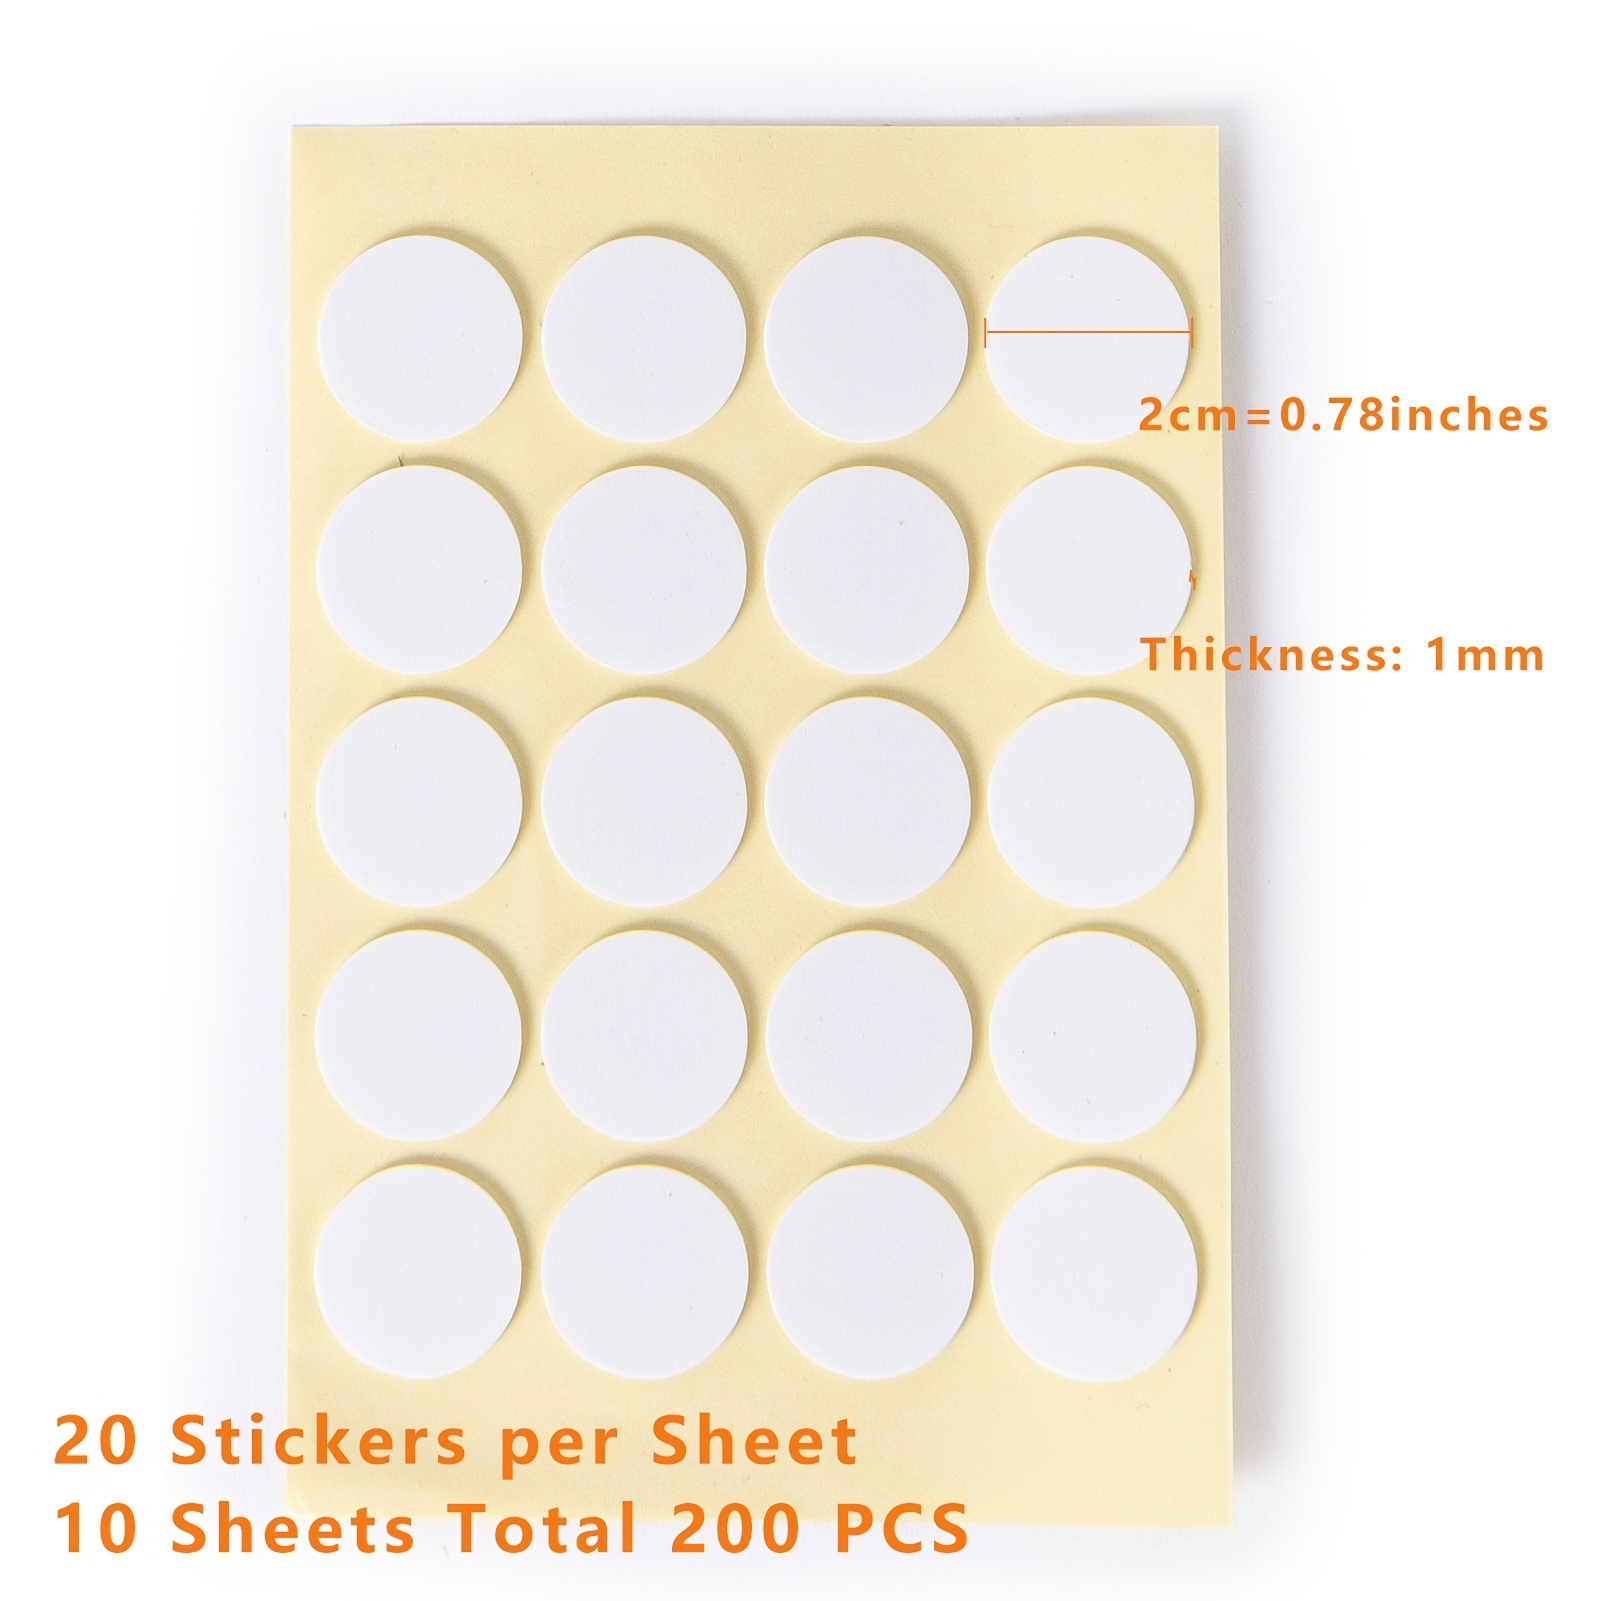  1120 Pieces 20 Sheets Candle Wick Stickers 15 mm Candle Making  Sticker Double-Sided Heat Resistance Stickers Hot Wax Wick Stickers for Candle  Making